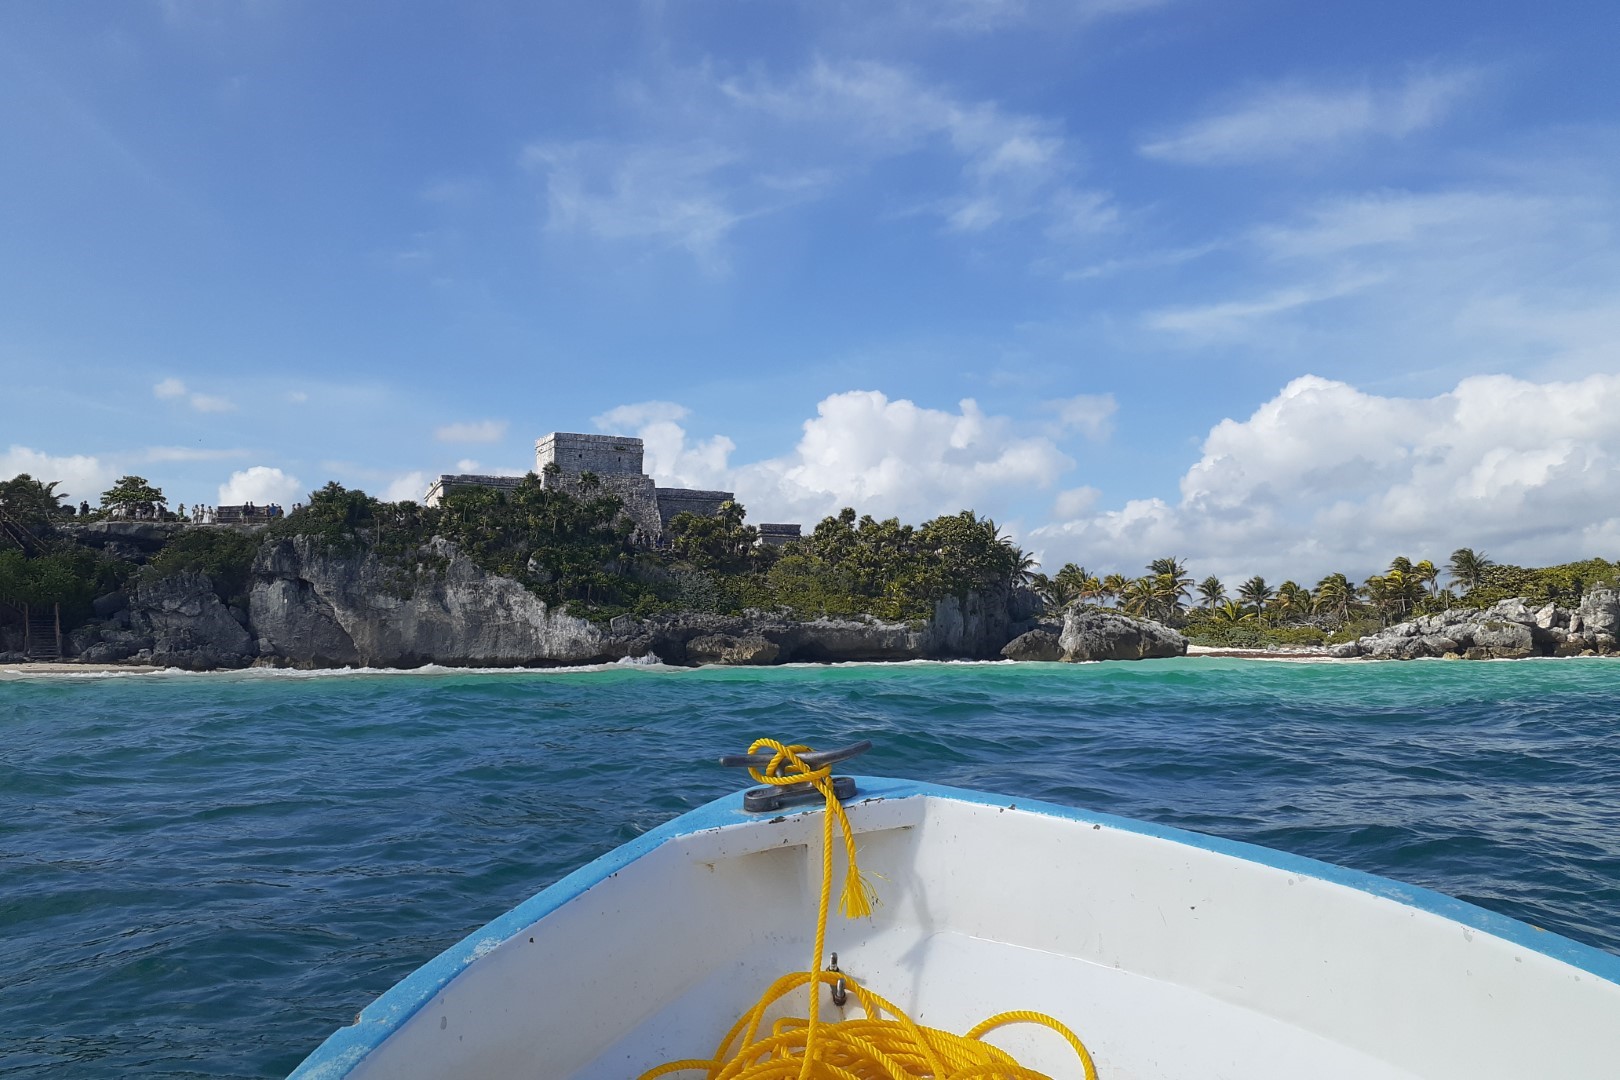 Tulum ruins from the boat, Snorkelling trip, Playa Pescadores, Tulum, Quintana Roo